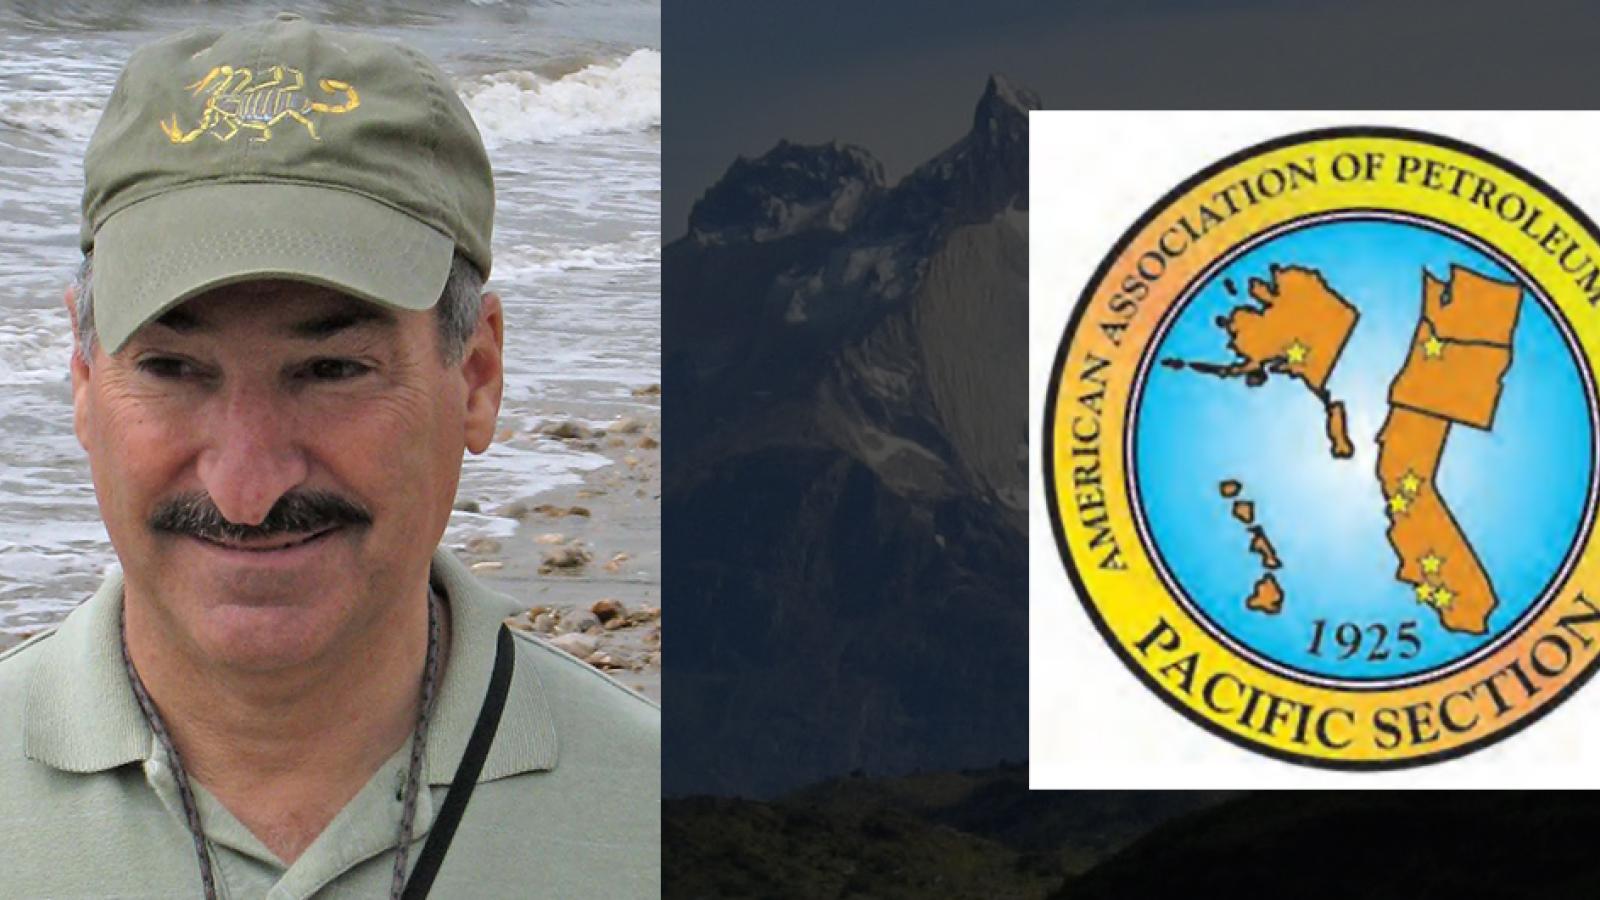 Rick Behl and the Pacific Section of the American Assoiation of Petroleum Geologists